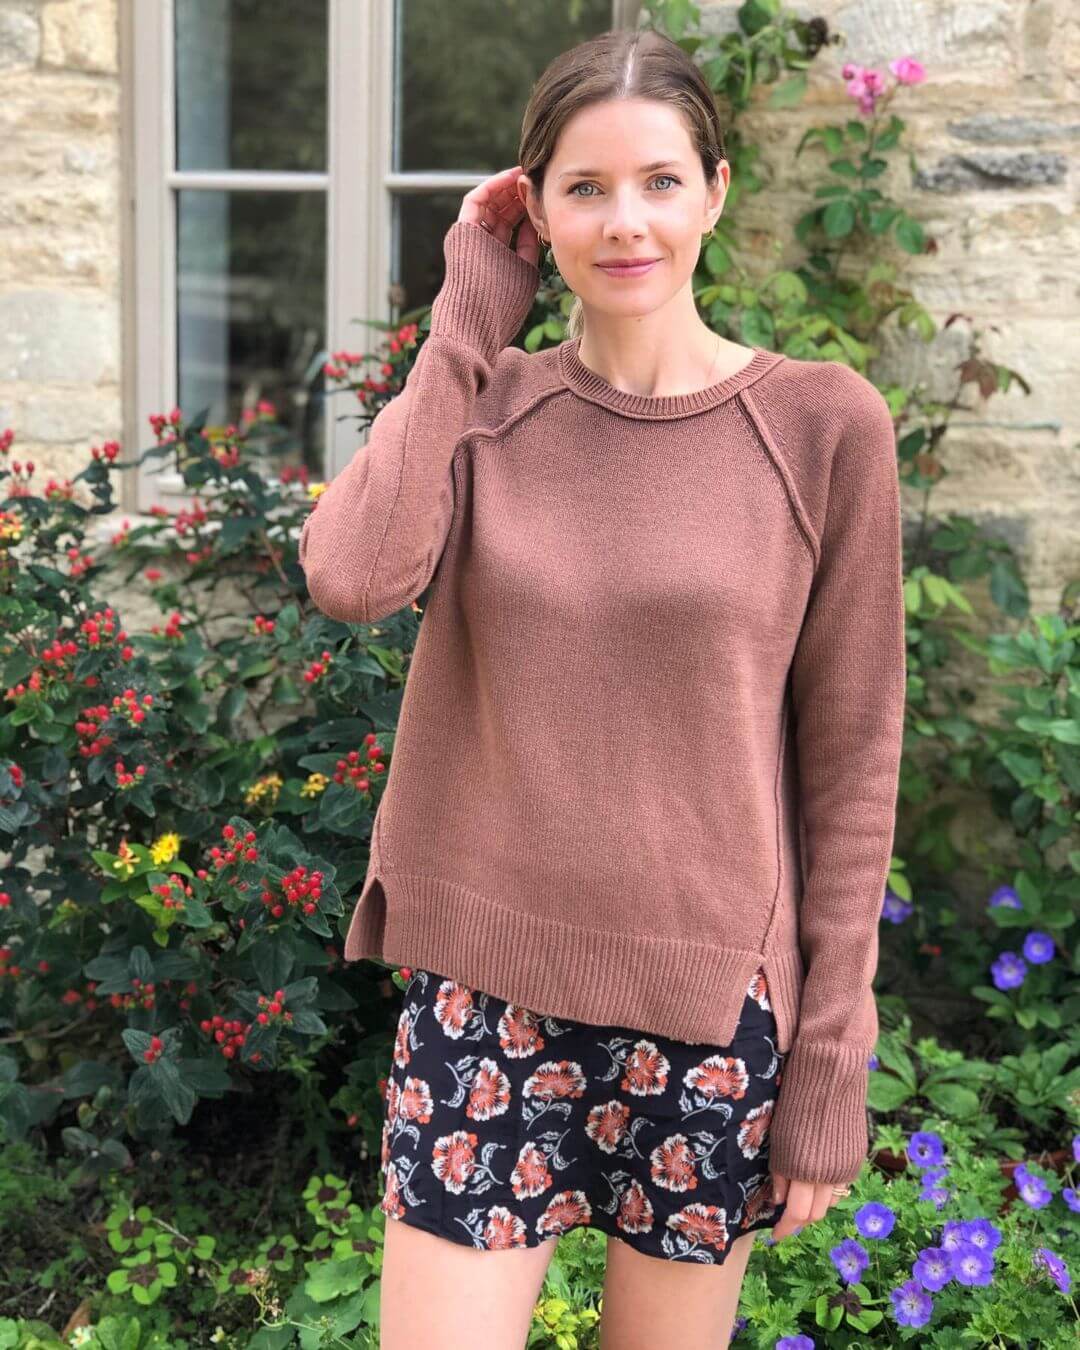 Rachel Hurd-Wood's Stylish Combination of Cashmere and Flowers